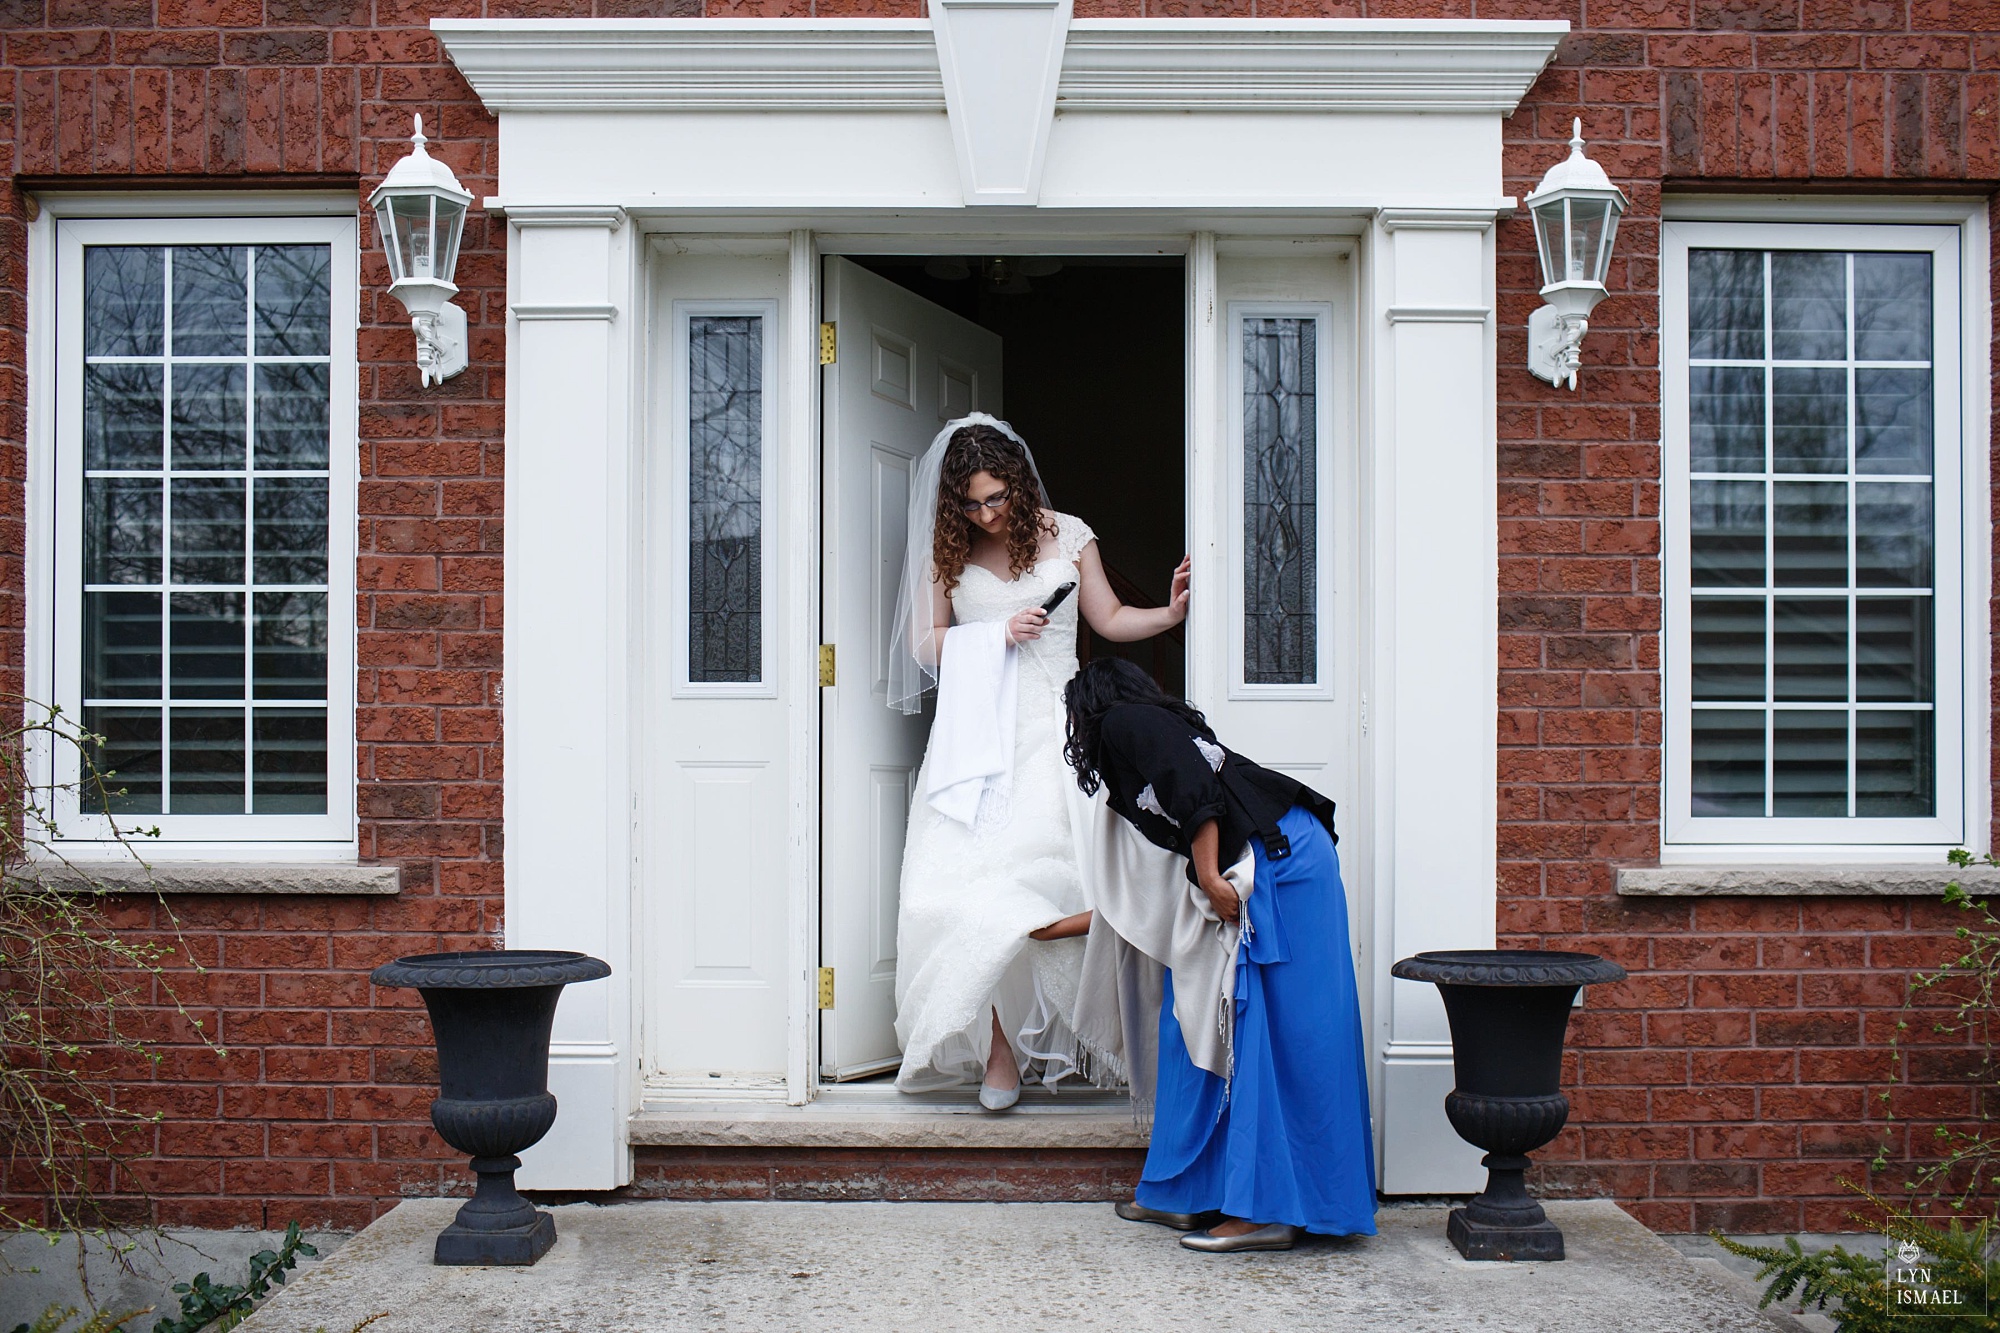 Bride comes out of her parent's house in Wellesley, being helped by her bridesmaid.